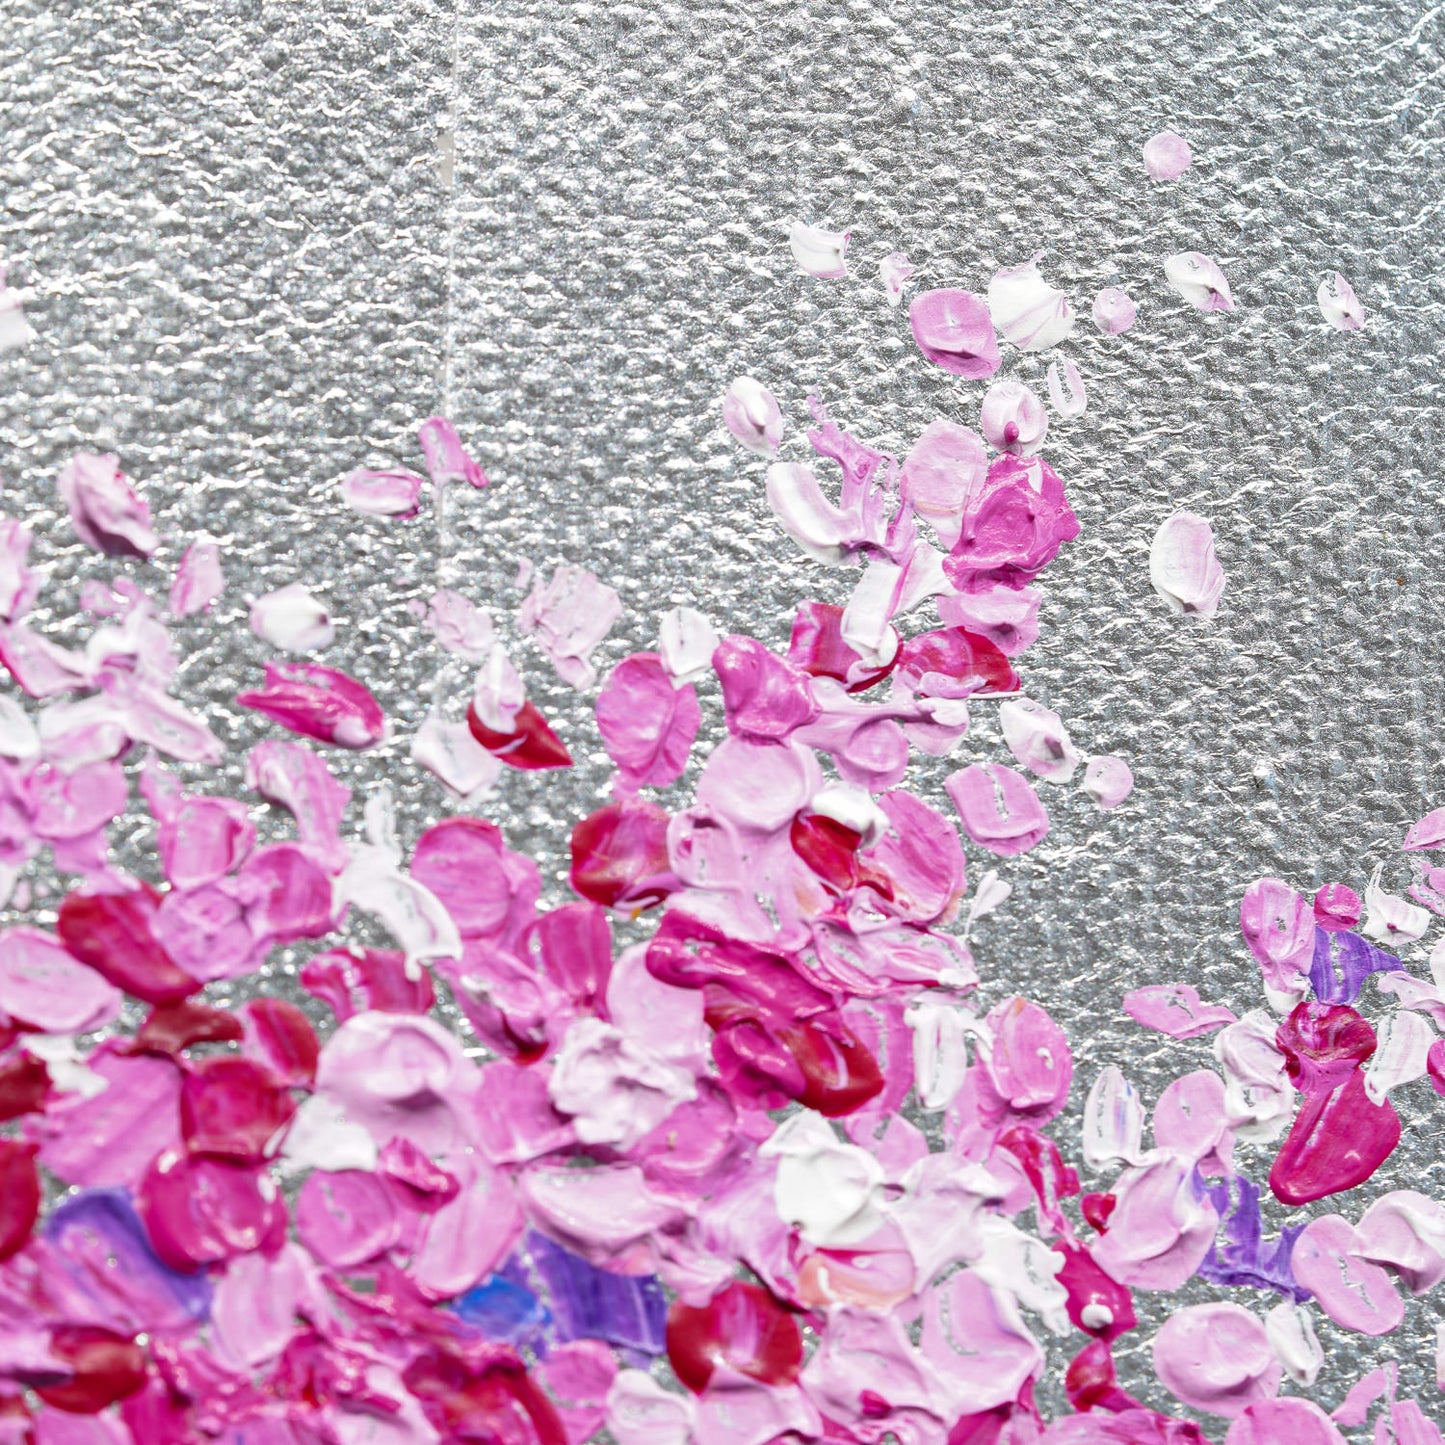 Cherry Blossom pink tree on a silver background painting